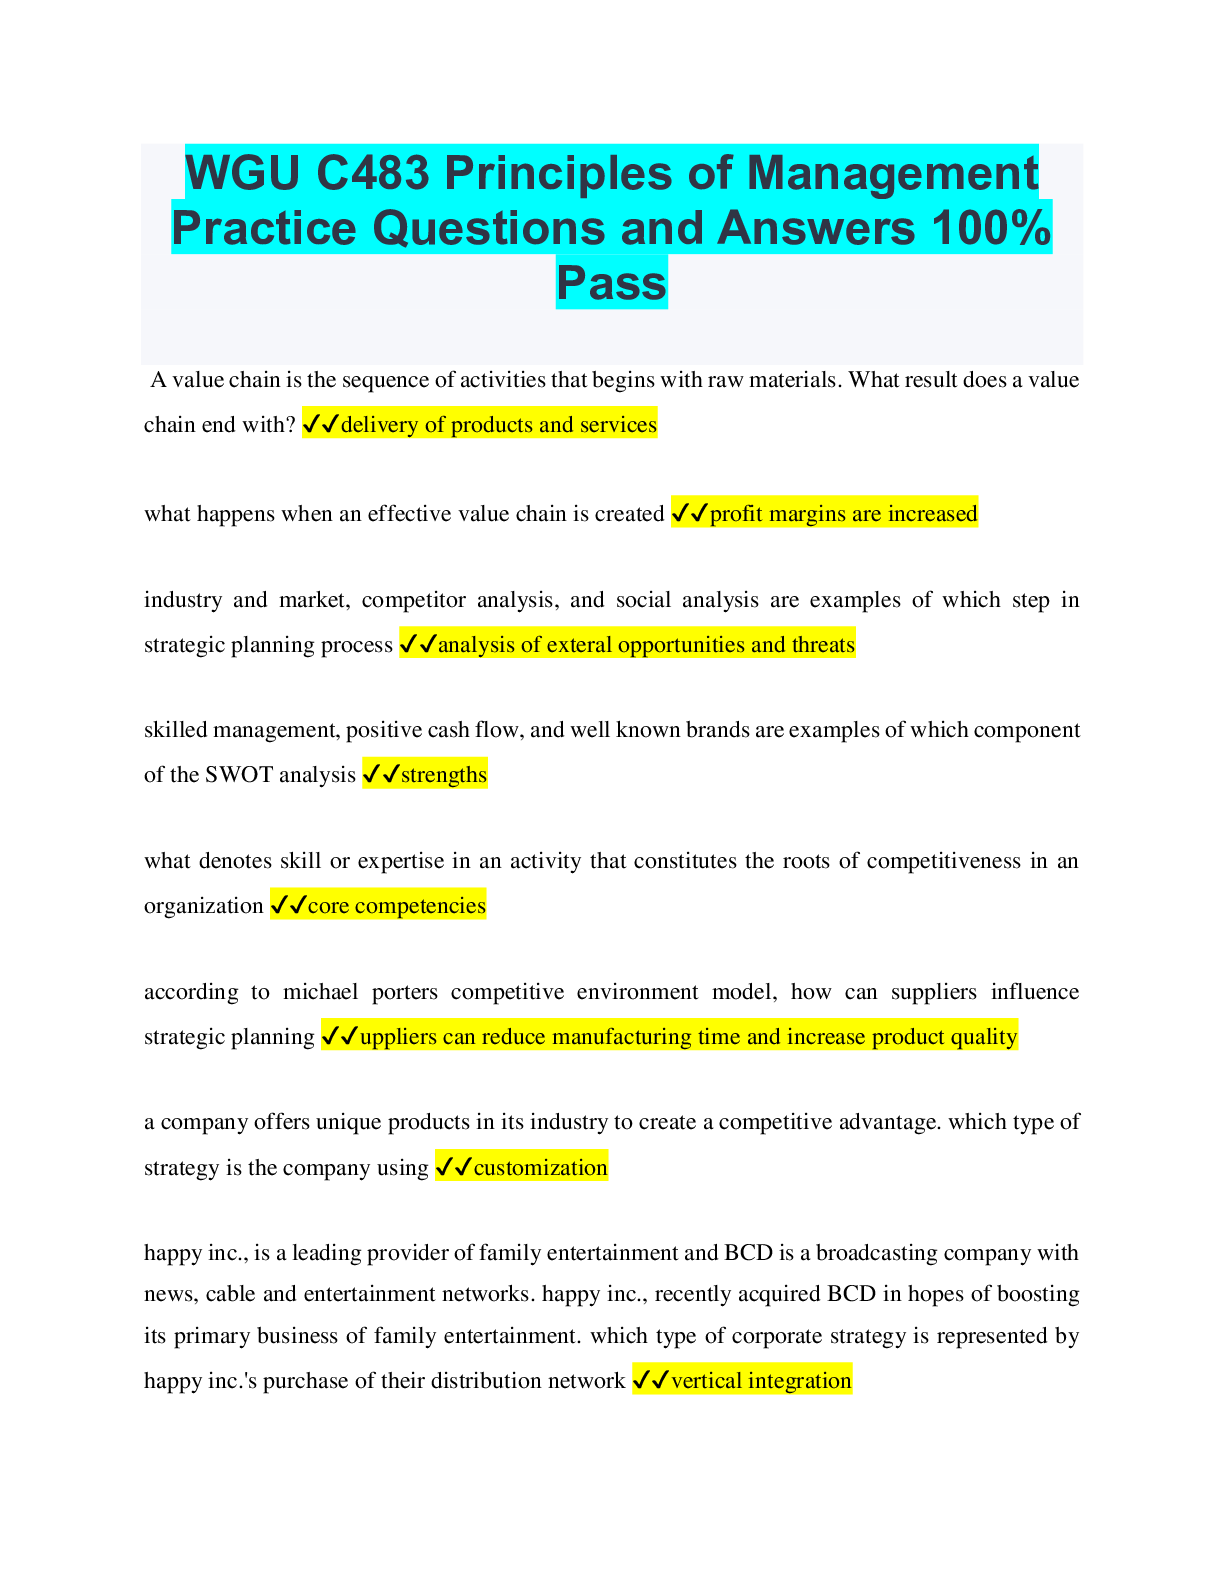 principles of management essay questions and answers pdf